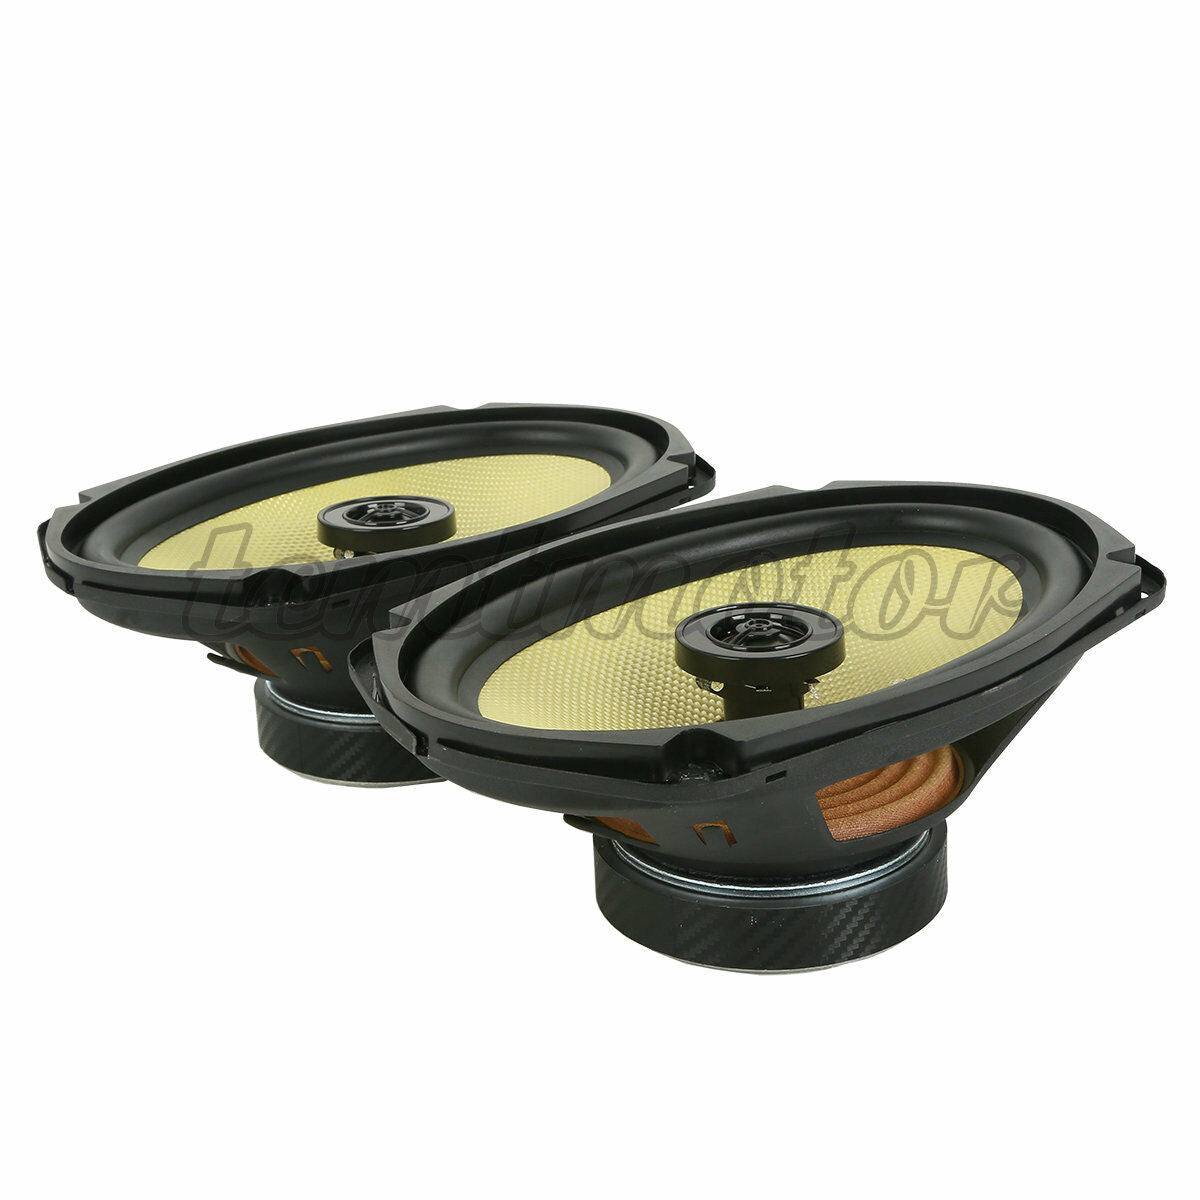 Saddlebag Lid 6"x9" Speakers Fit For Harley Touring Electra Street Glide 94-22 - Moto Life Products